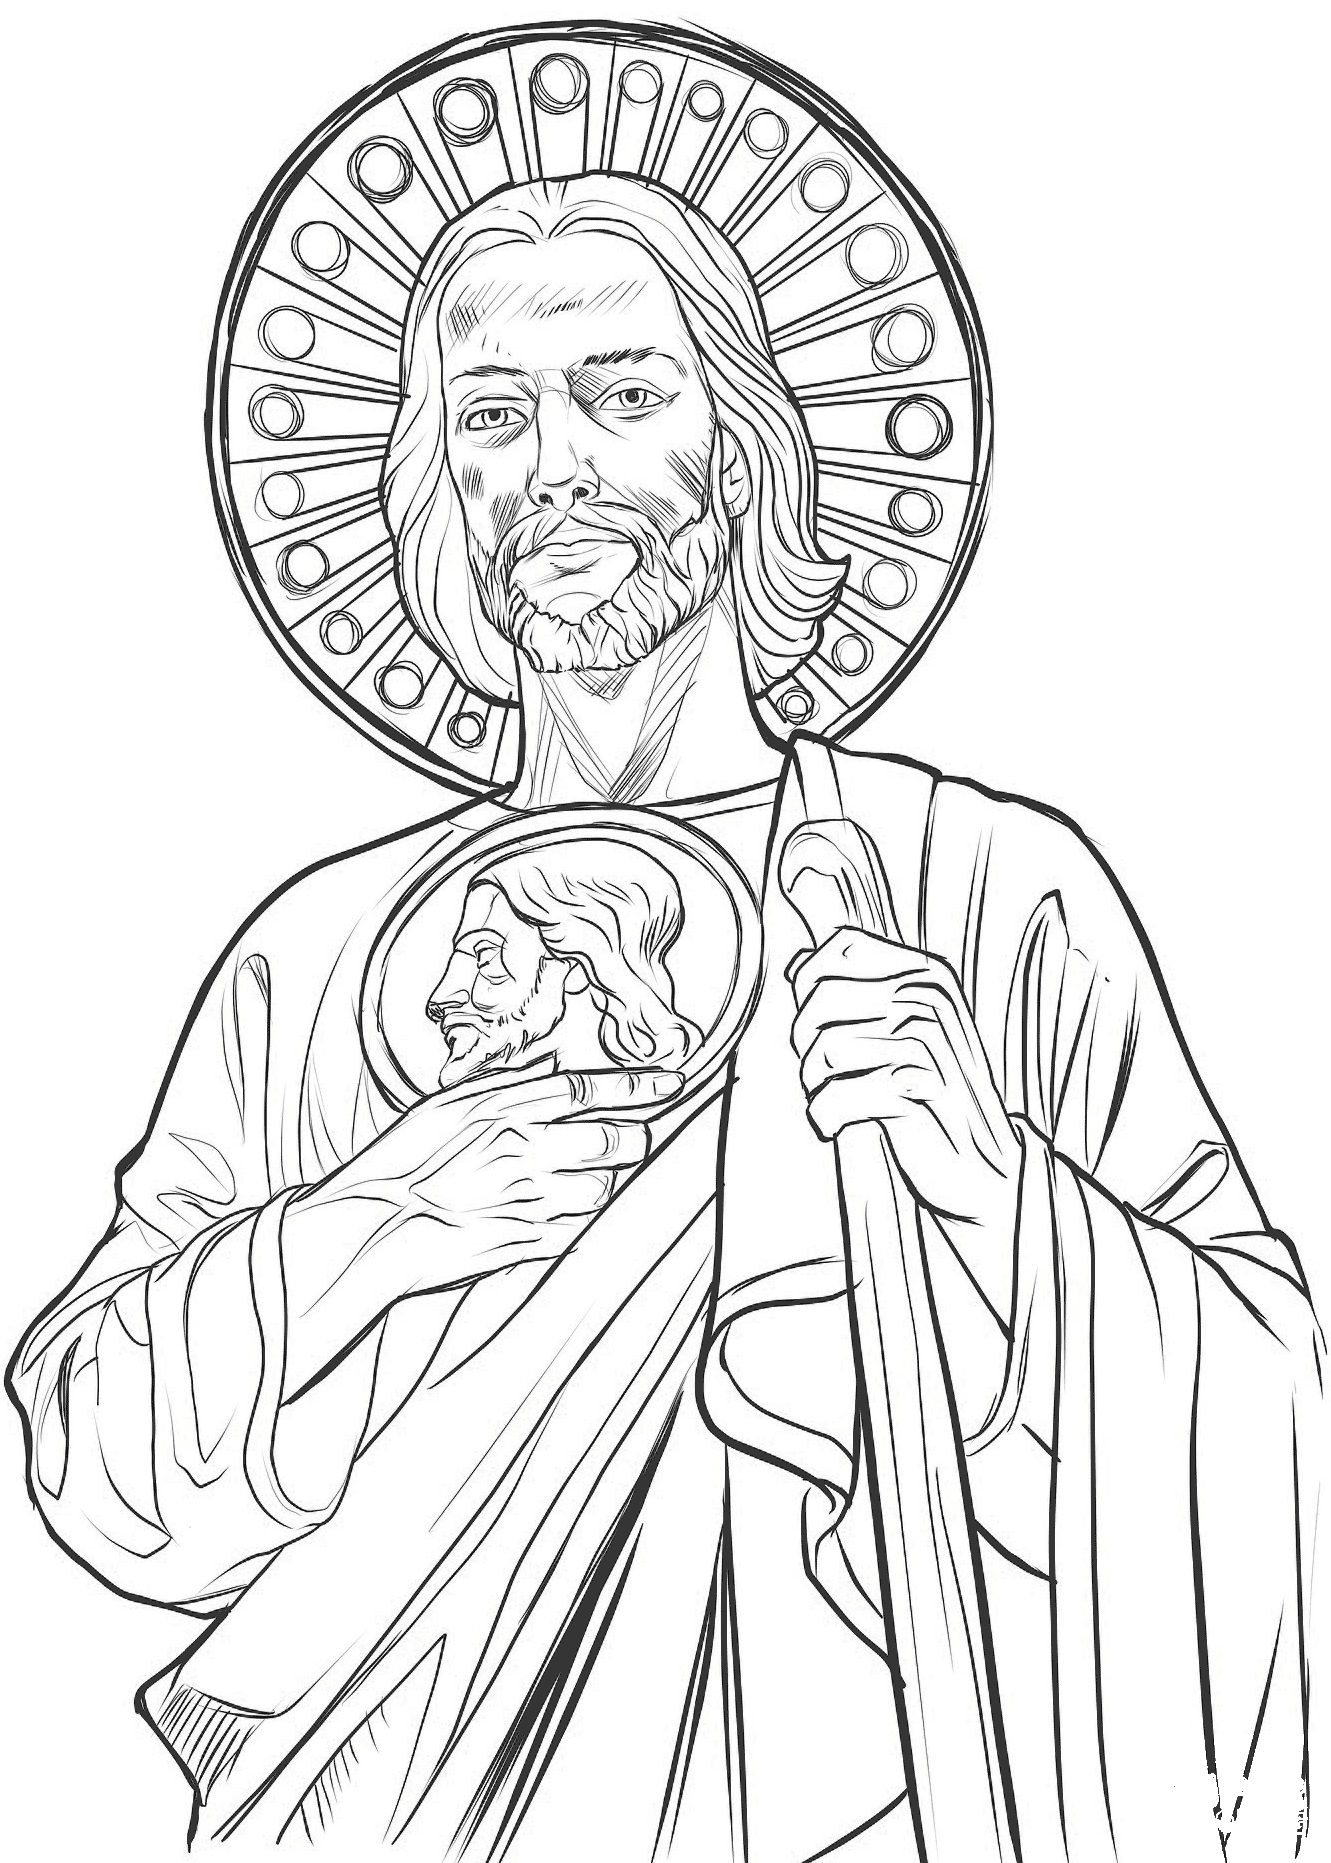 St. Jude Thaddeus coloring page - ColouringPages